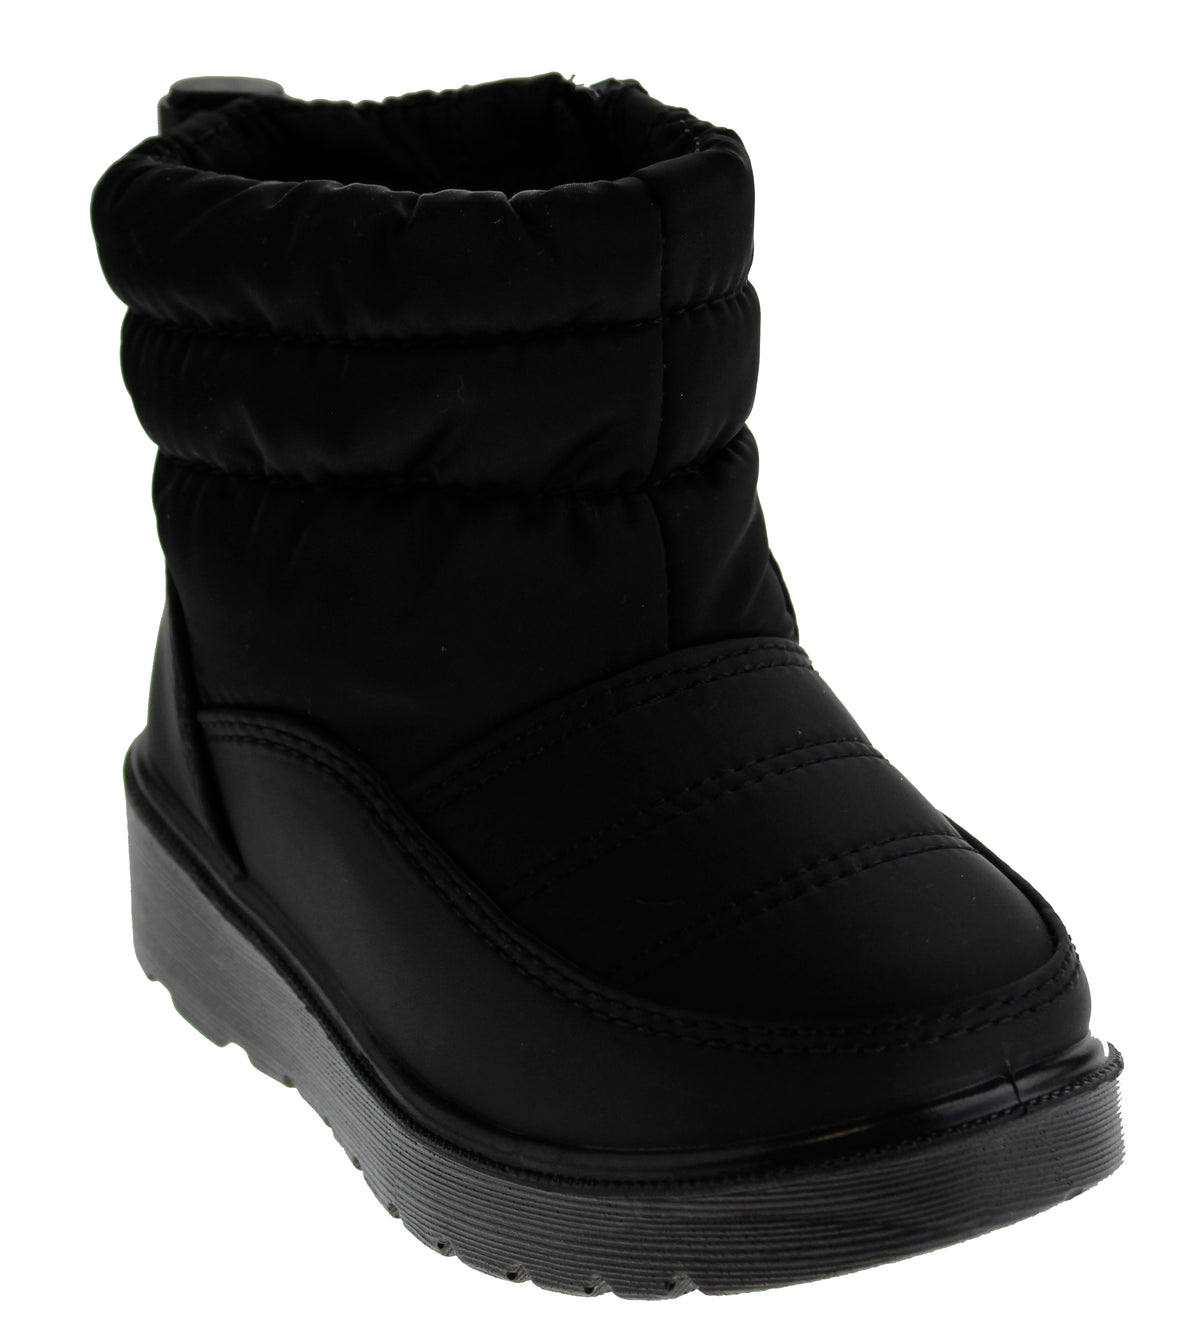 Coleen 1A Baby Girls Insulated Fur Lined Rain/Snow Boot